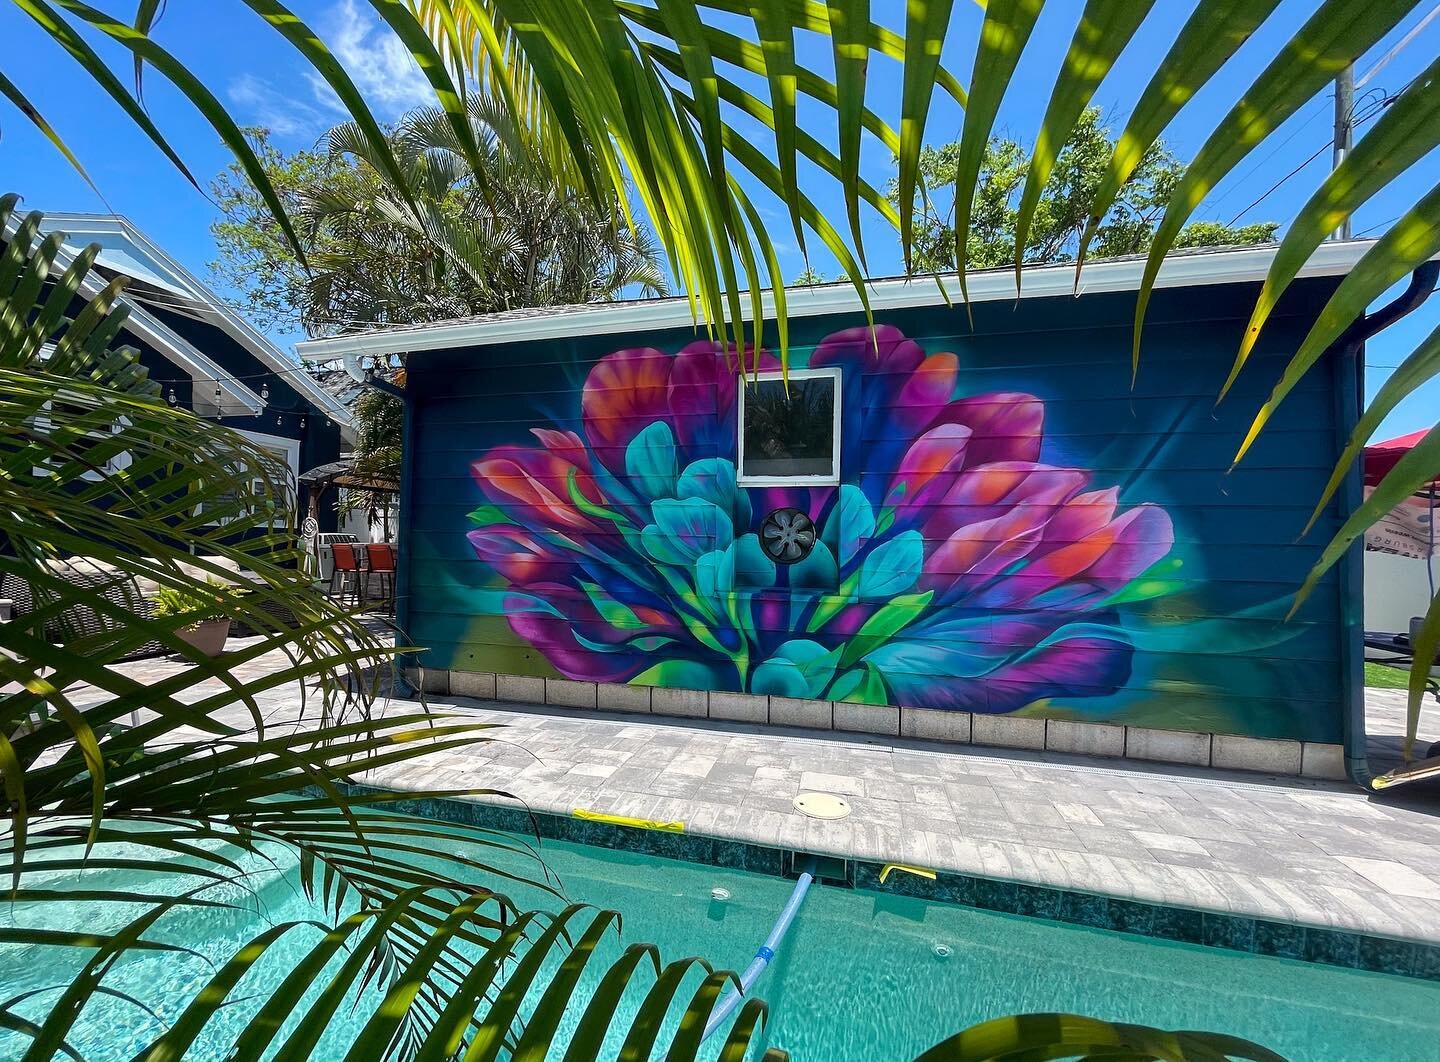 Latest poolside wall located in Kenwood St. Pete 🌴💧 can&rsquo;t stay away from these colors lately. grateful for all the creative freedom on this one. 
&bull;
Just in time for summer 😎 Cheers!